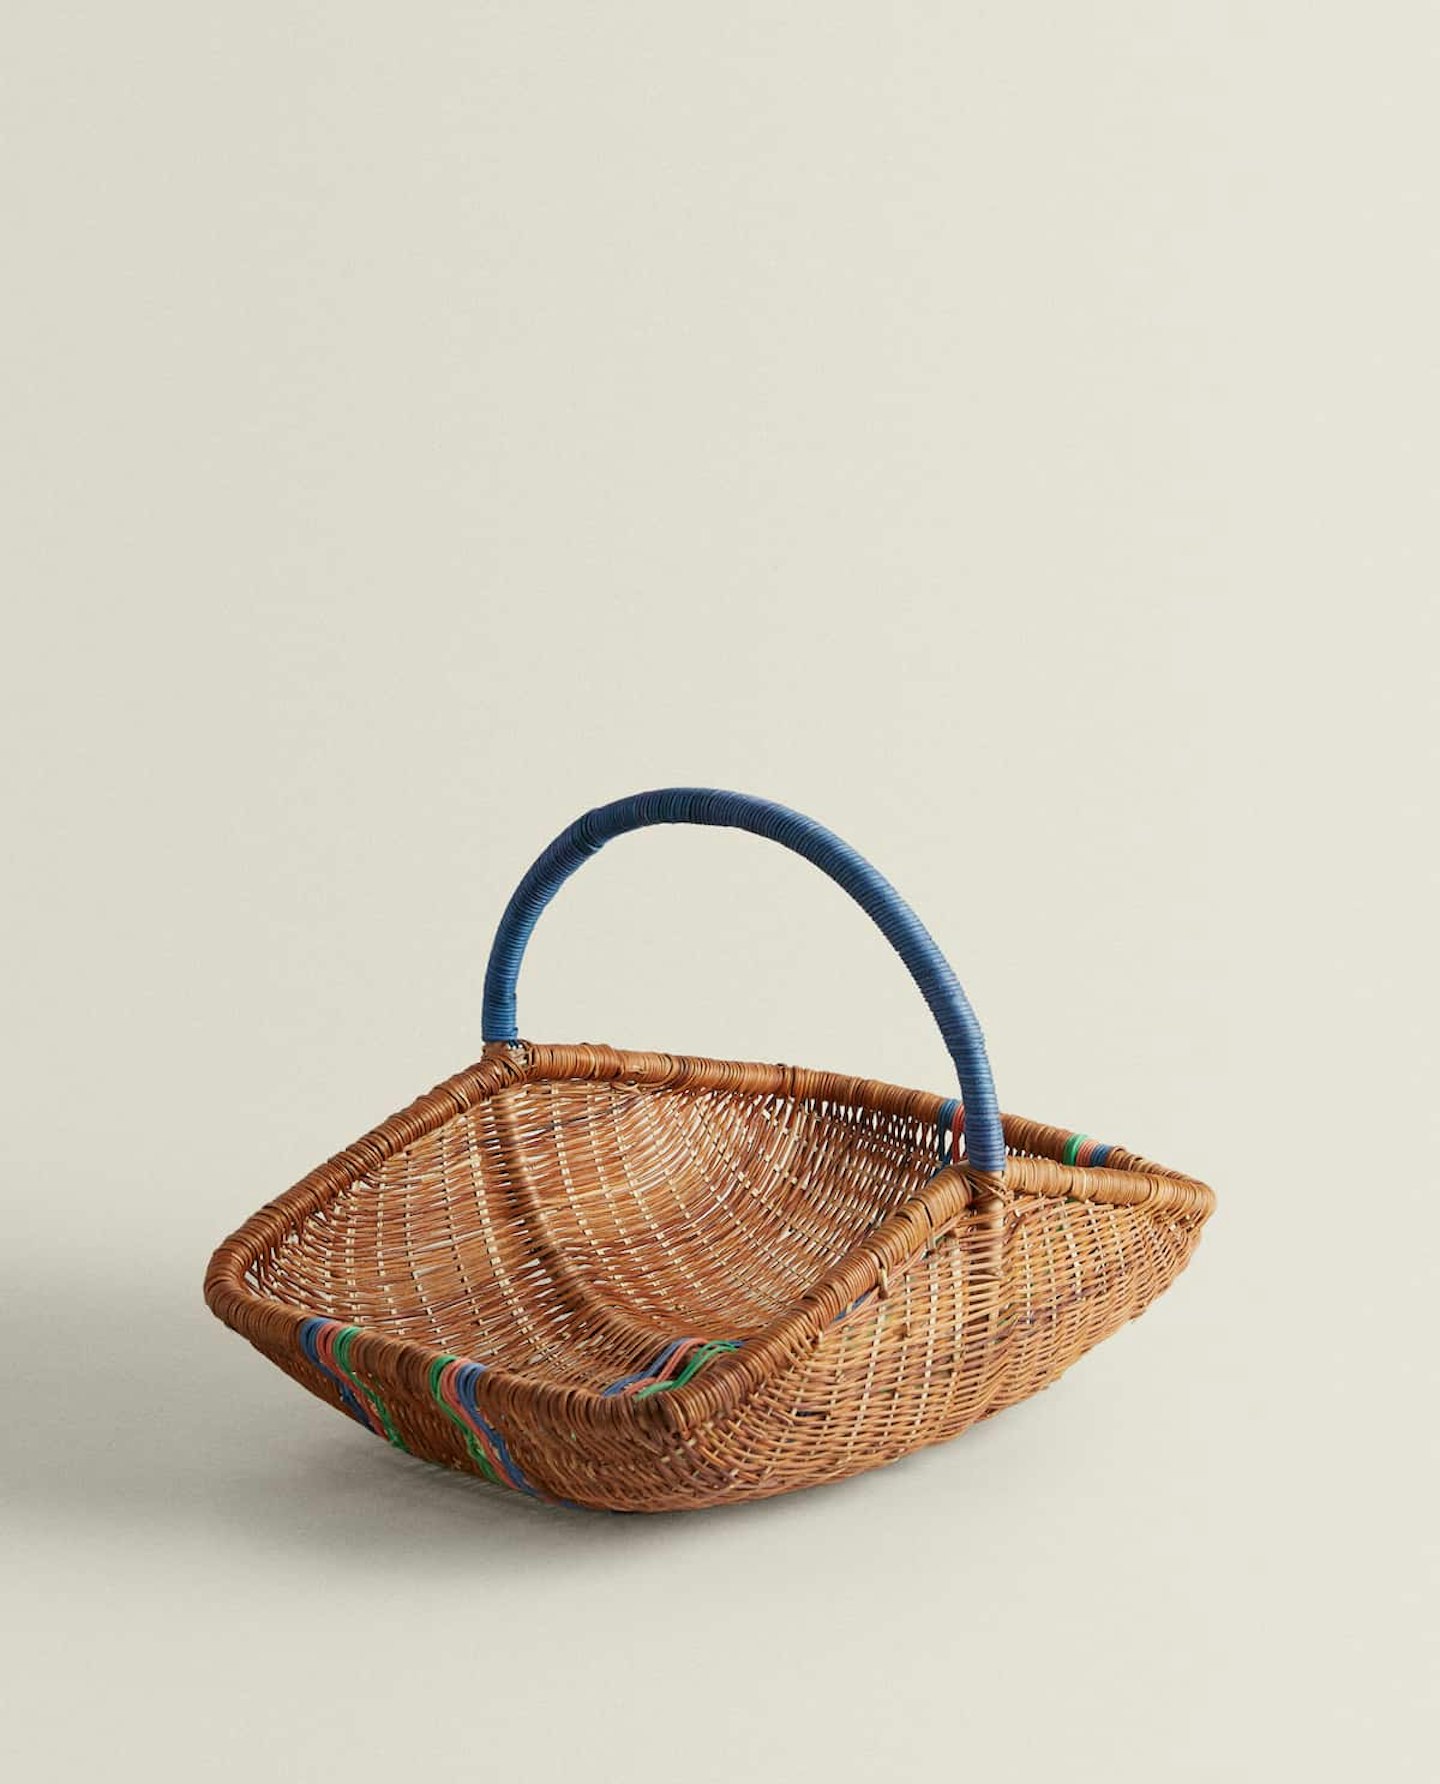 Zara Home, basket with a large handle, £25.99